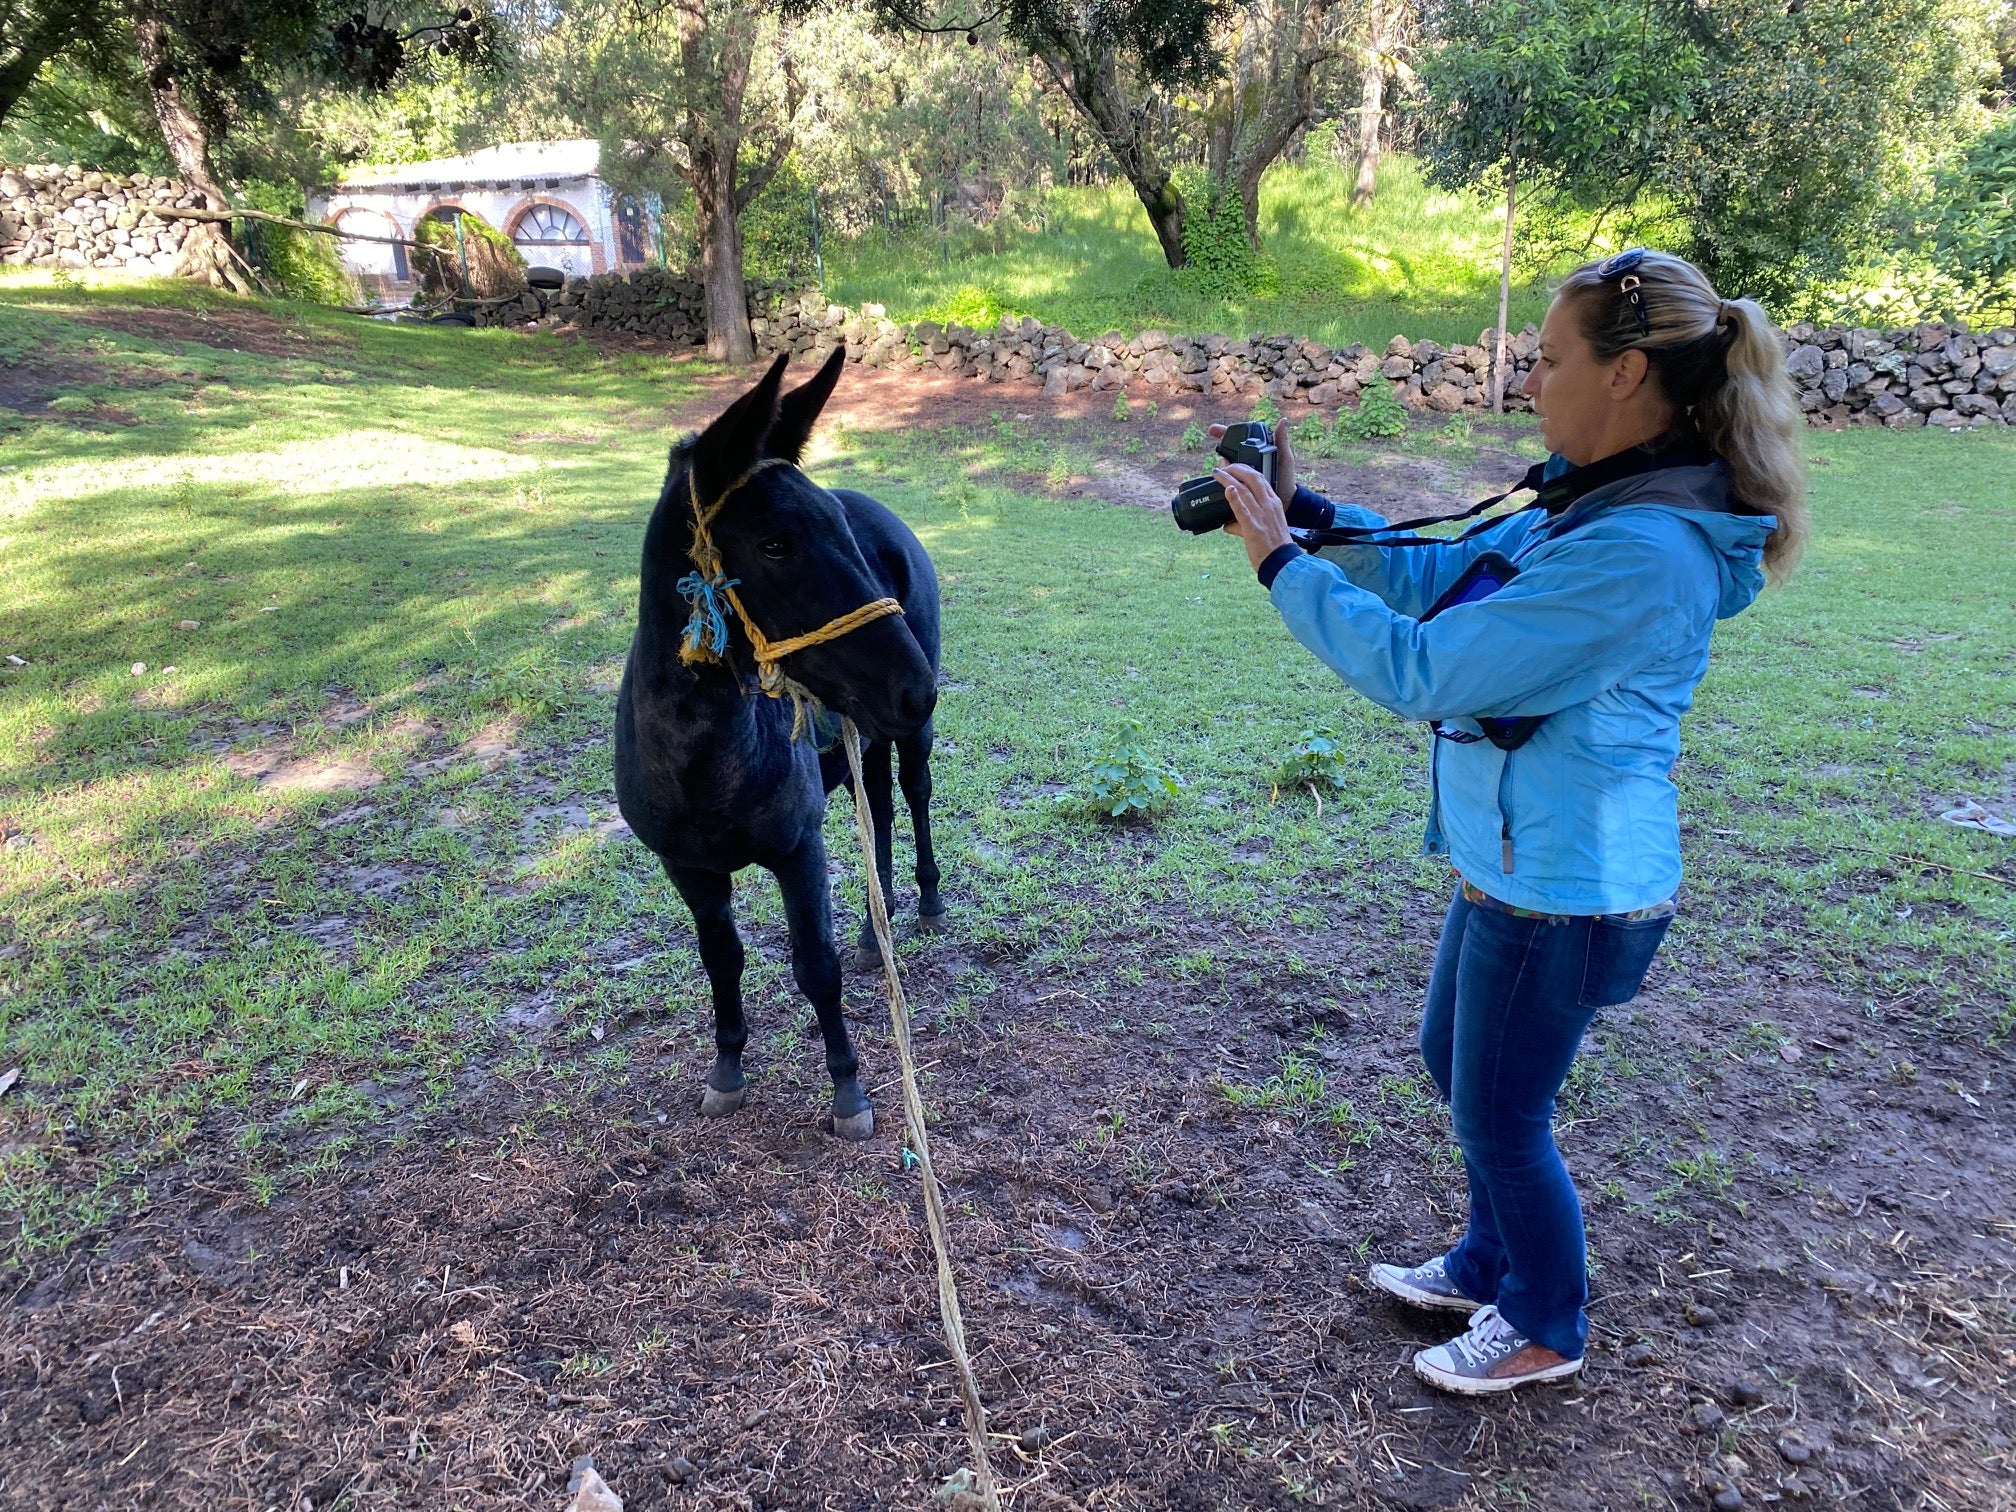 On left, a mule turns to a woman in a light blue jacket taking a picture of the animal.